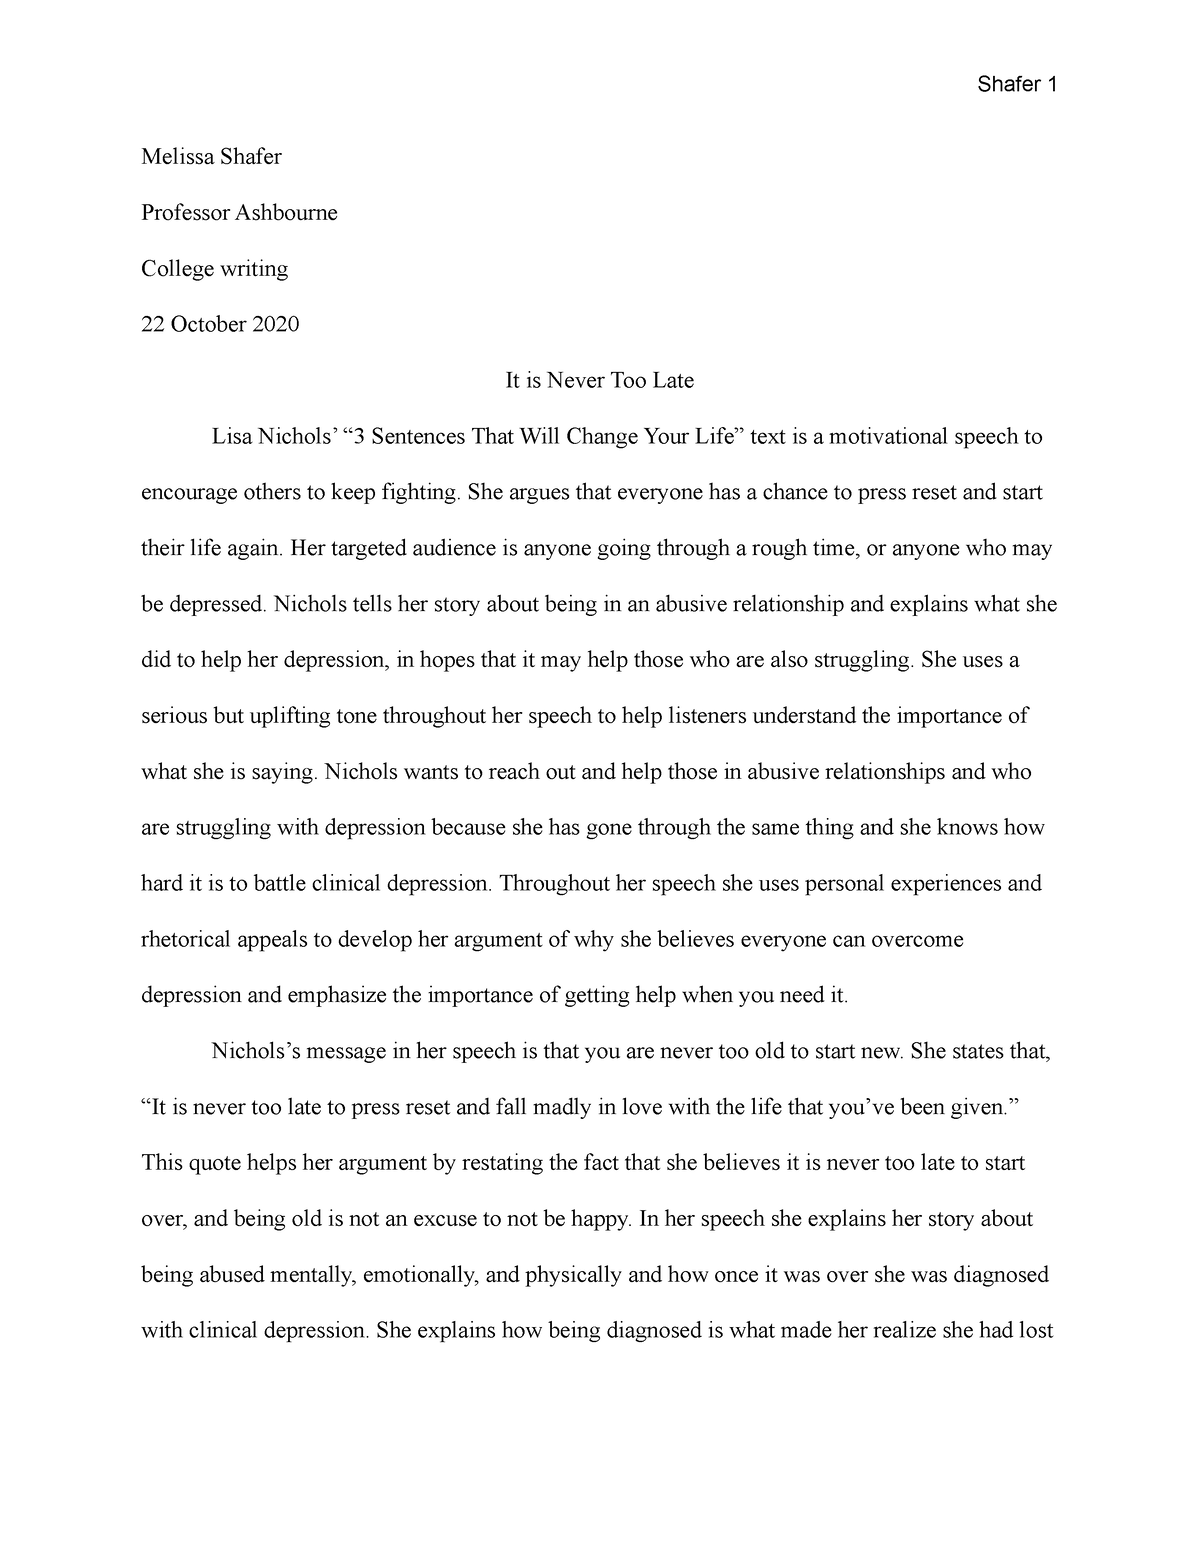 it was never too late essay